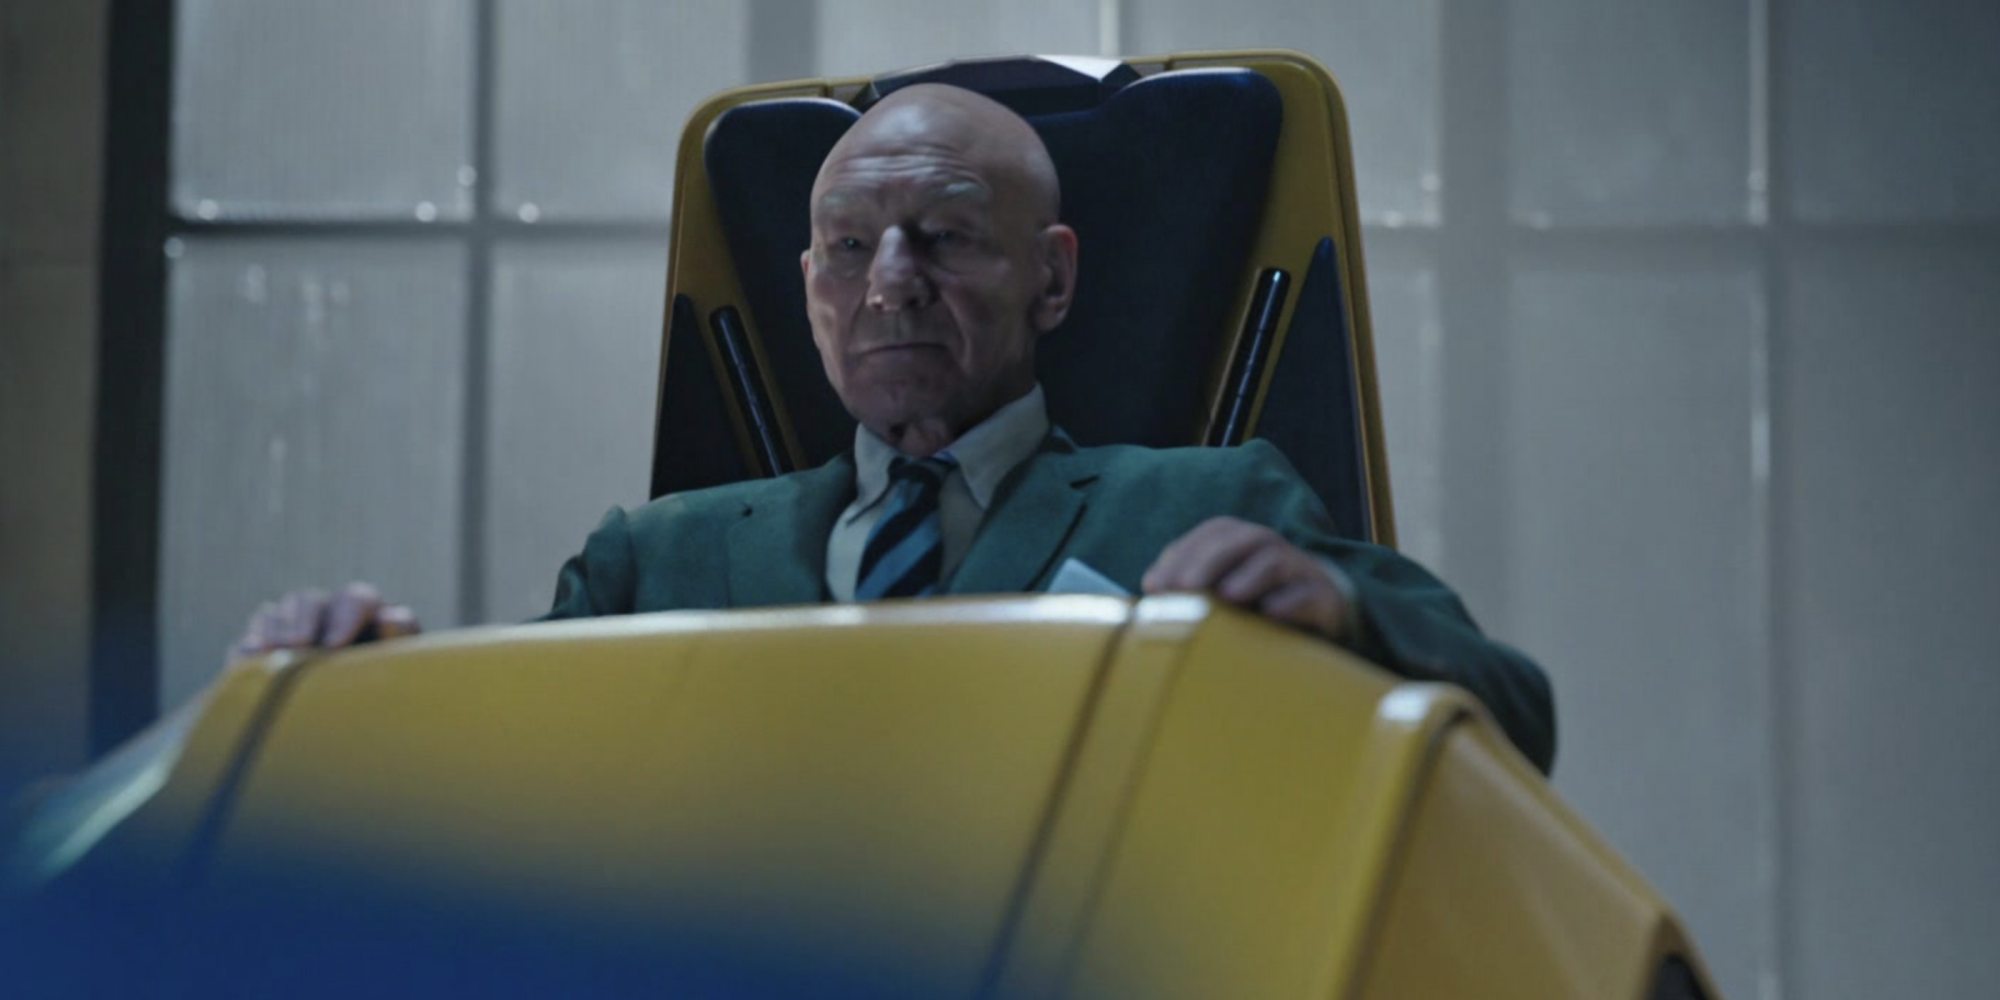 Professor X looking serious in Doctor Strange in the Multiverse of Madness